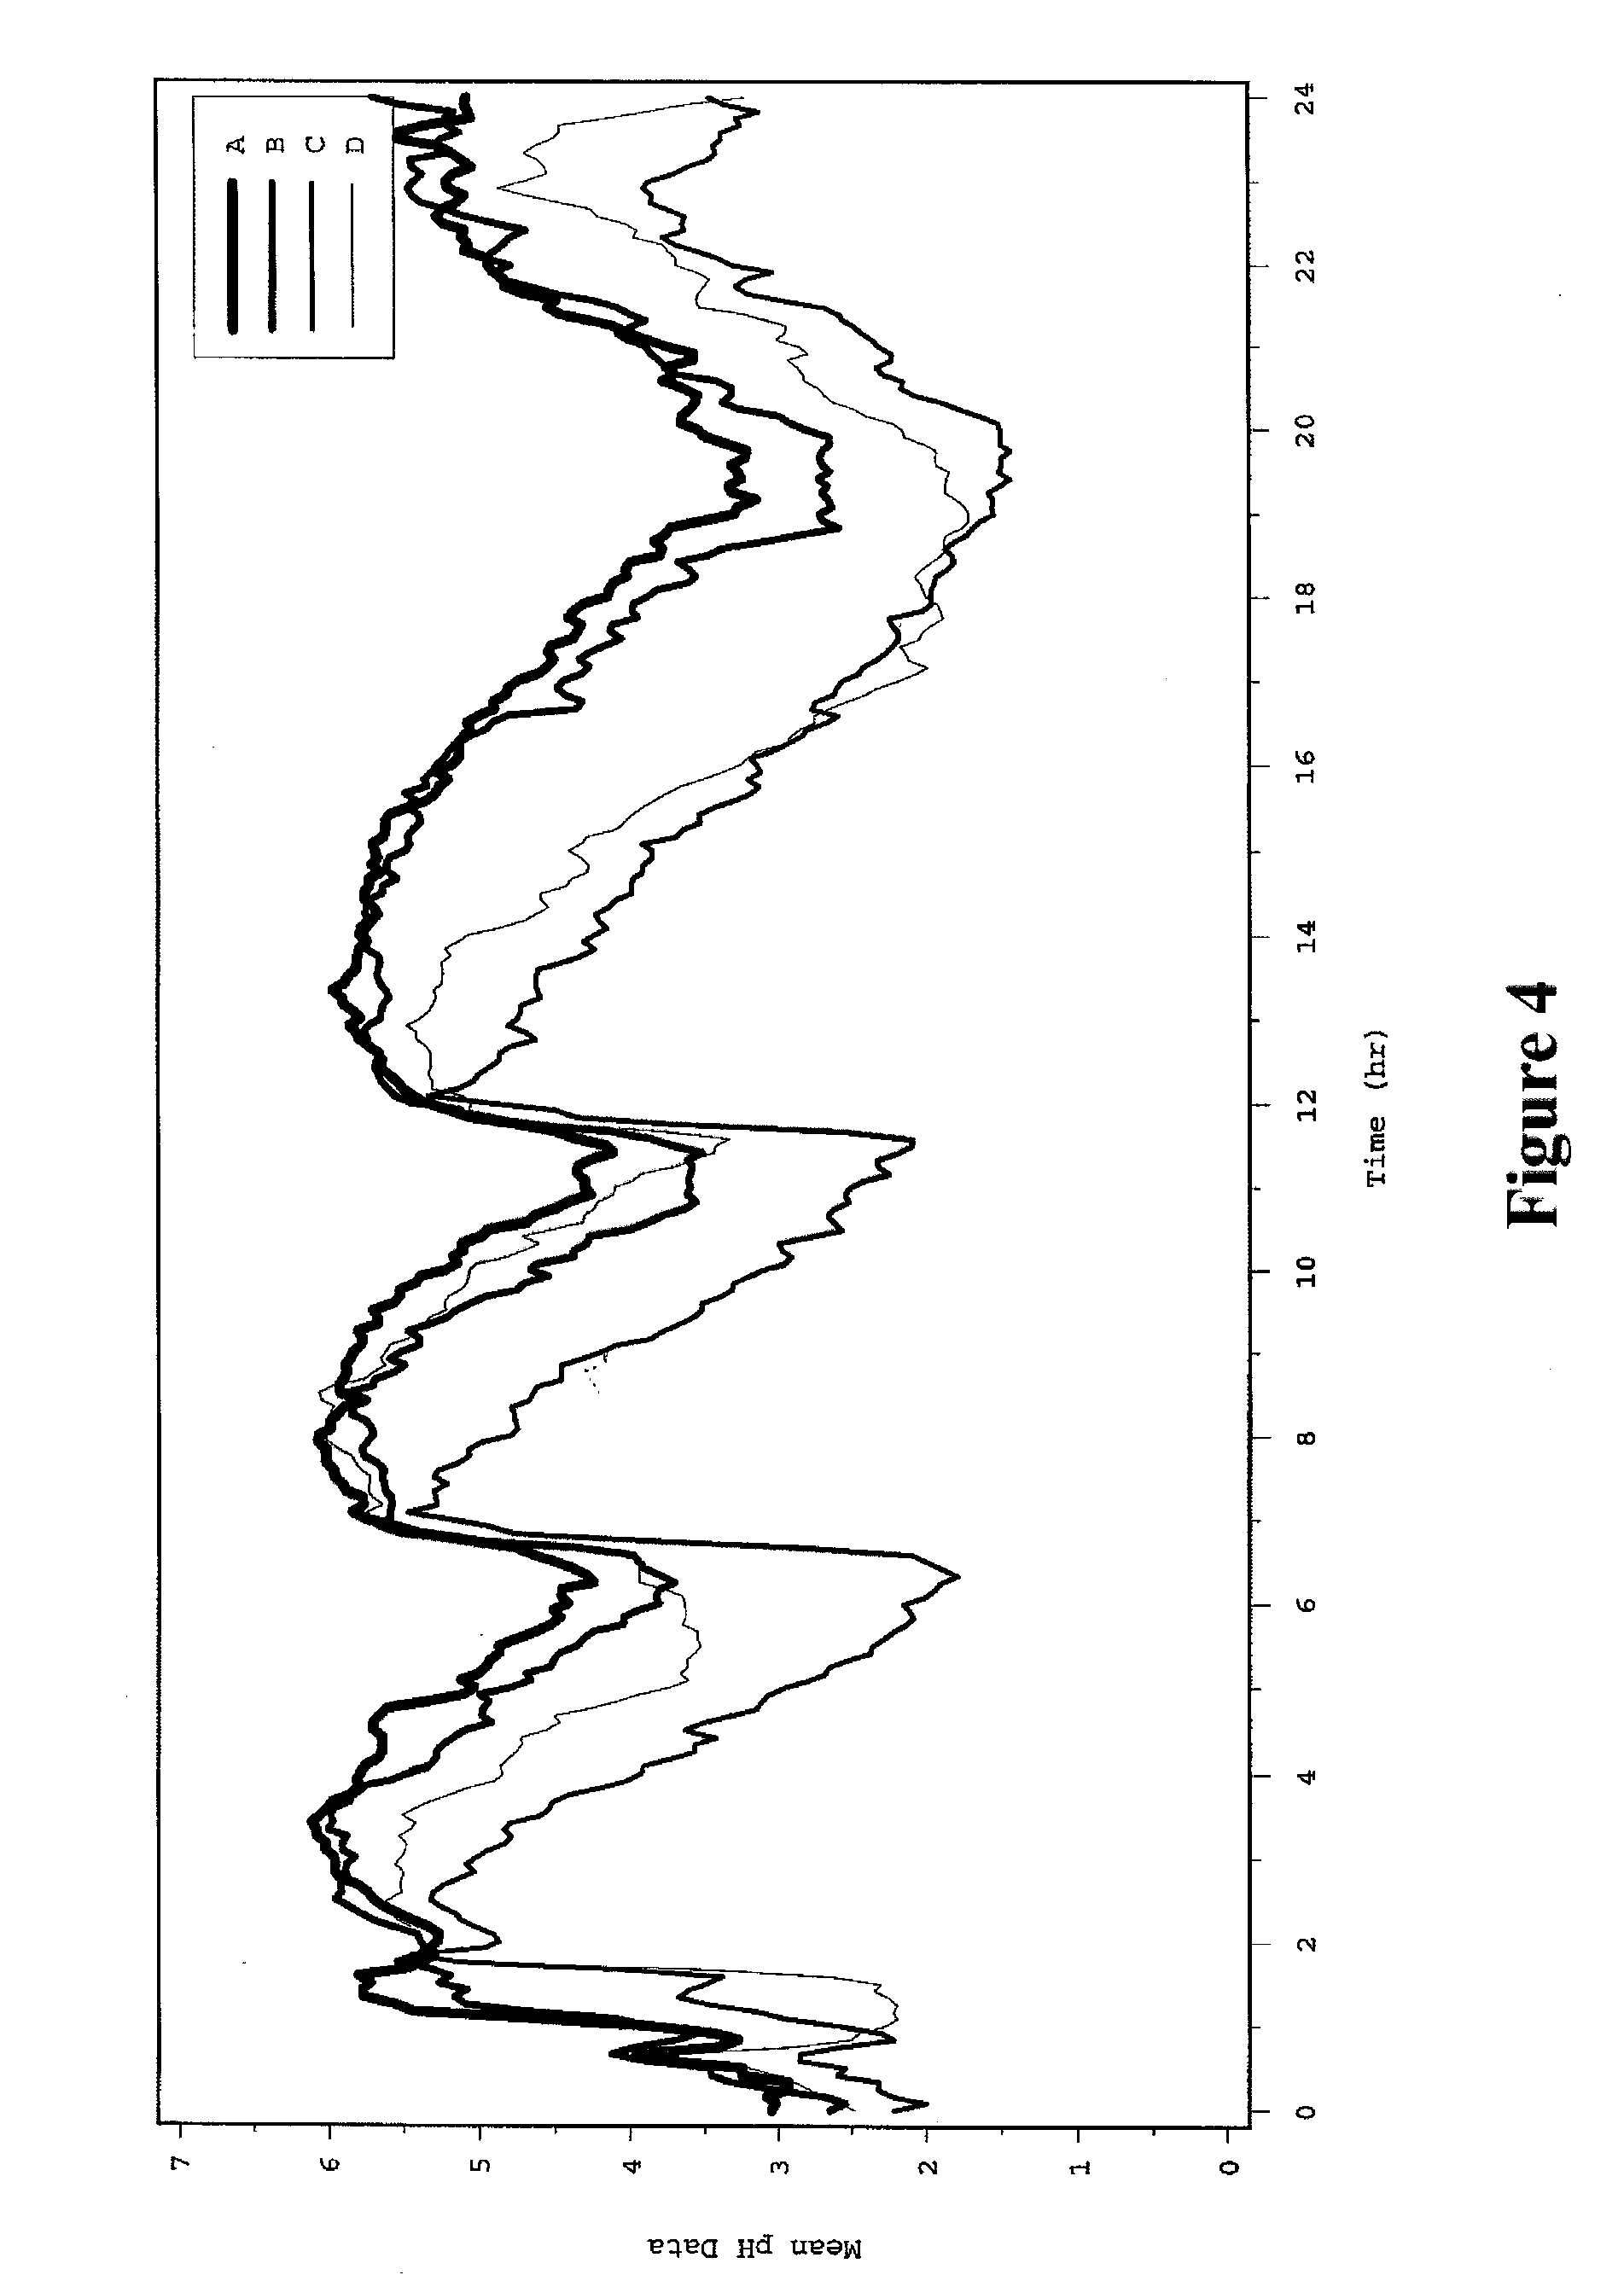 Pharmaceutical Compositions for the Coordinated Delivery of Naproxen and Esomeprazole